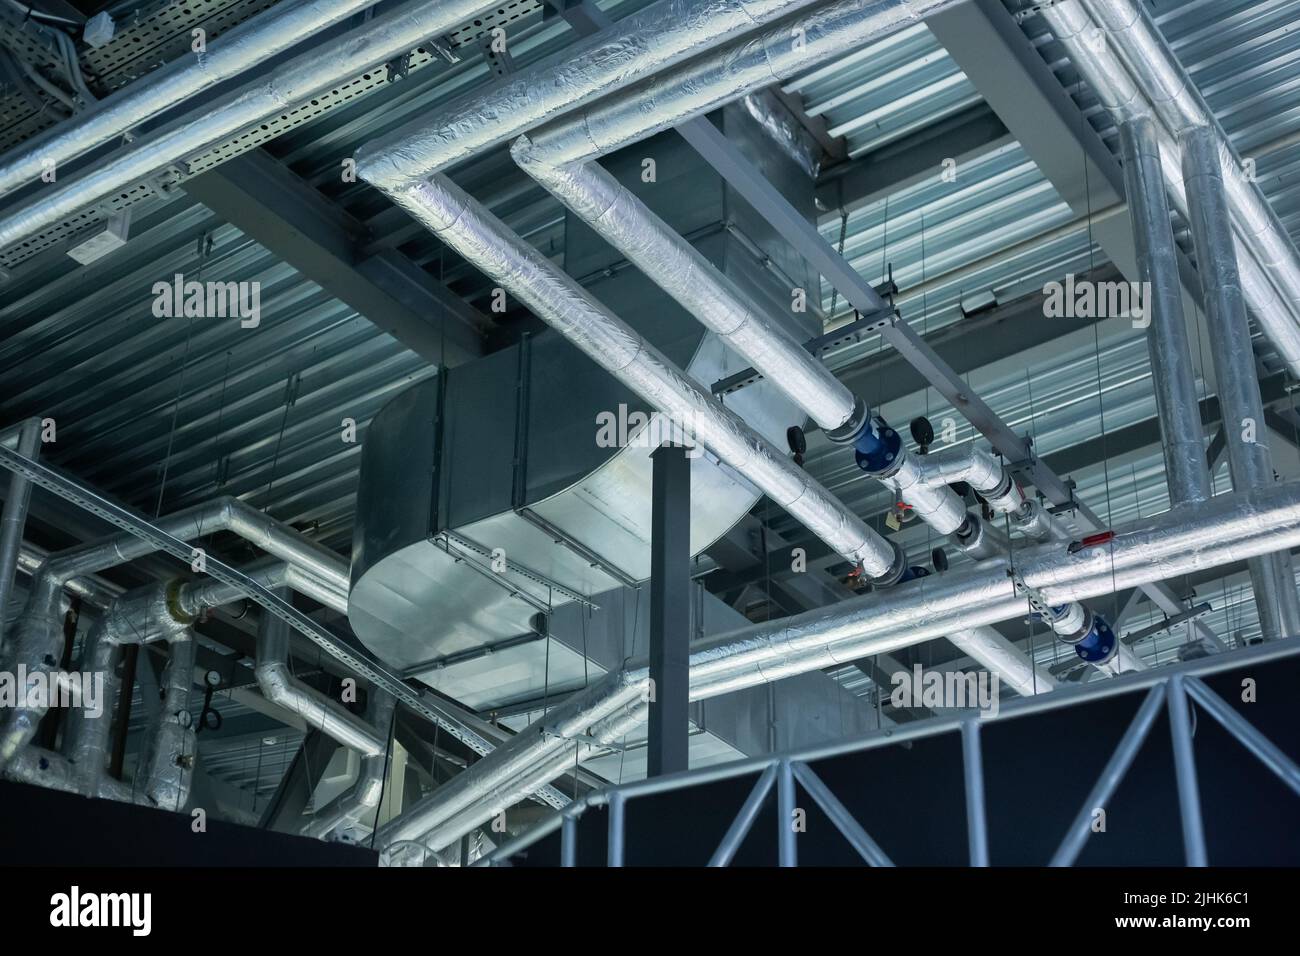 Air conditioning, ventilation ducts and heating pipes of buildings. Laying of engineering networks under ceiling. Industrial background Stock Photo